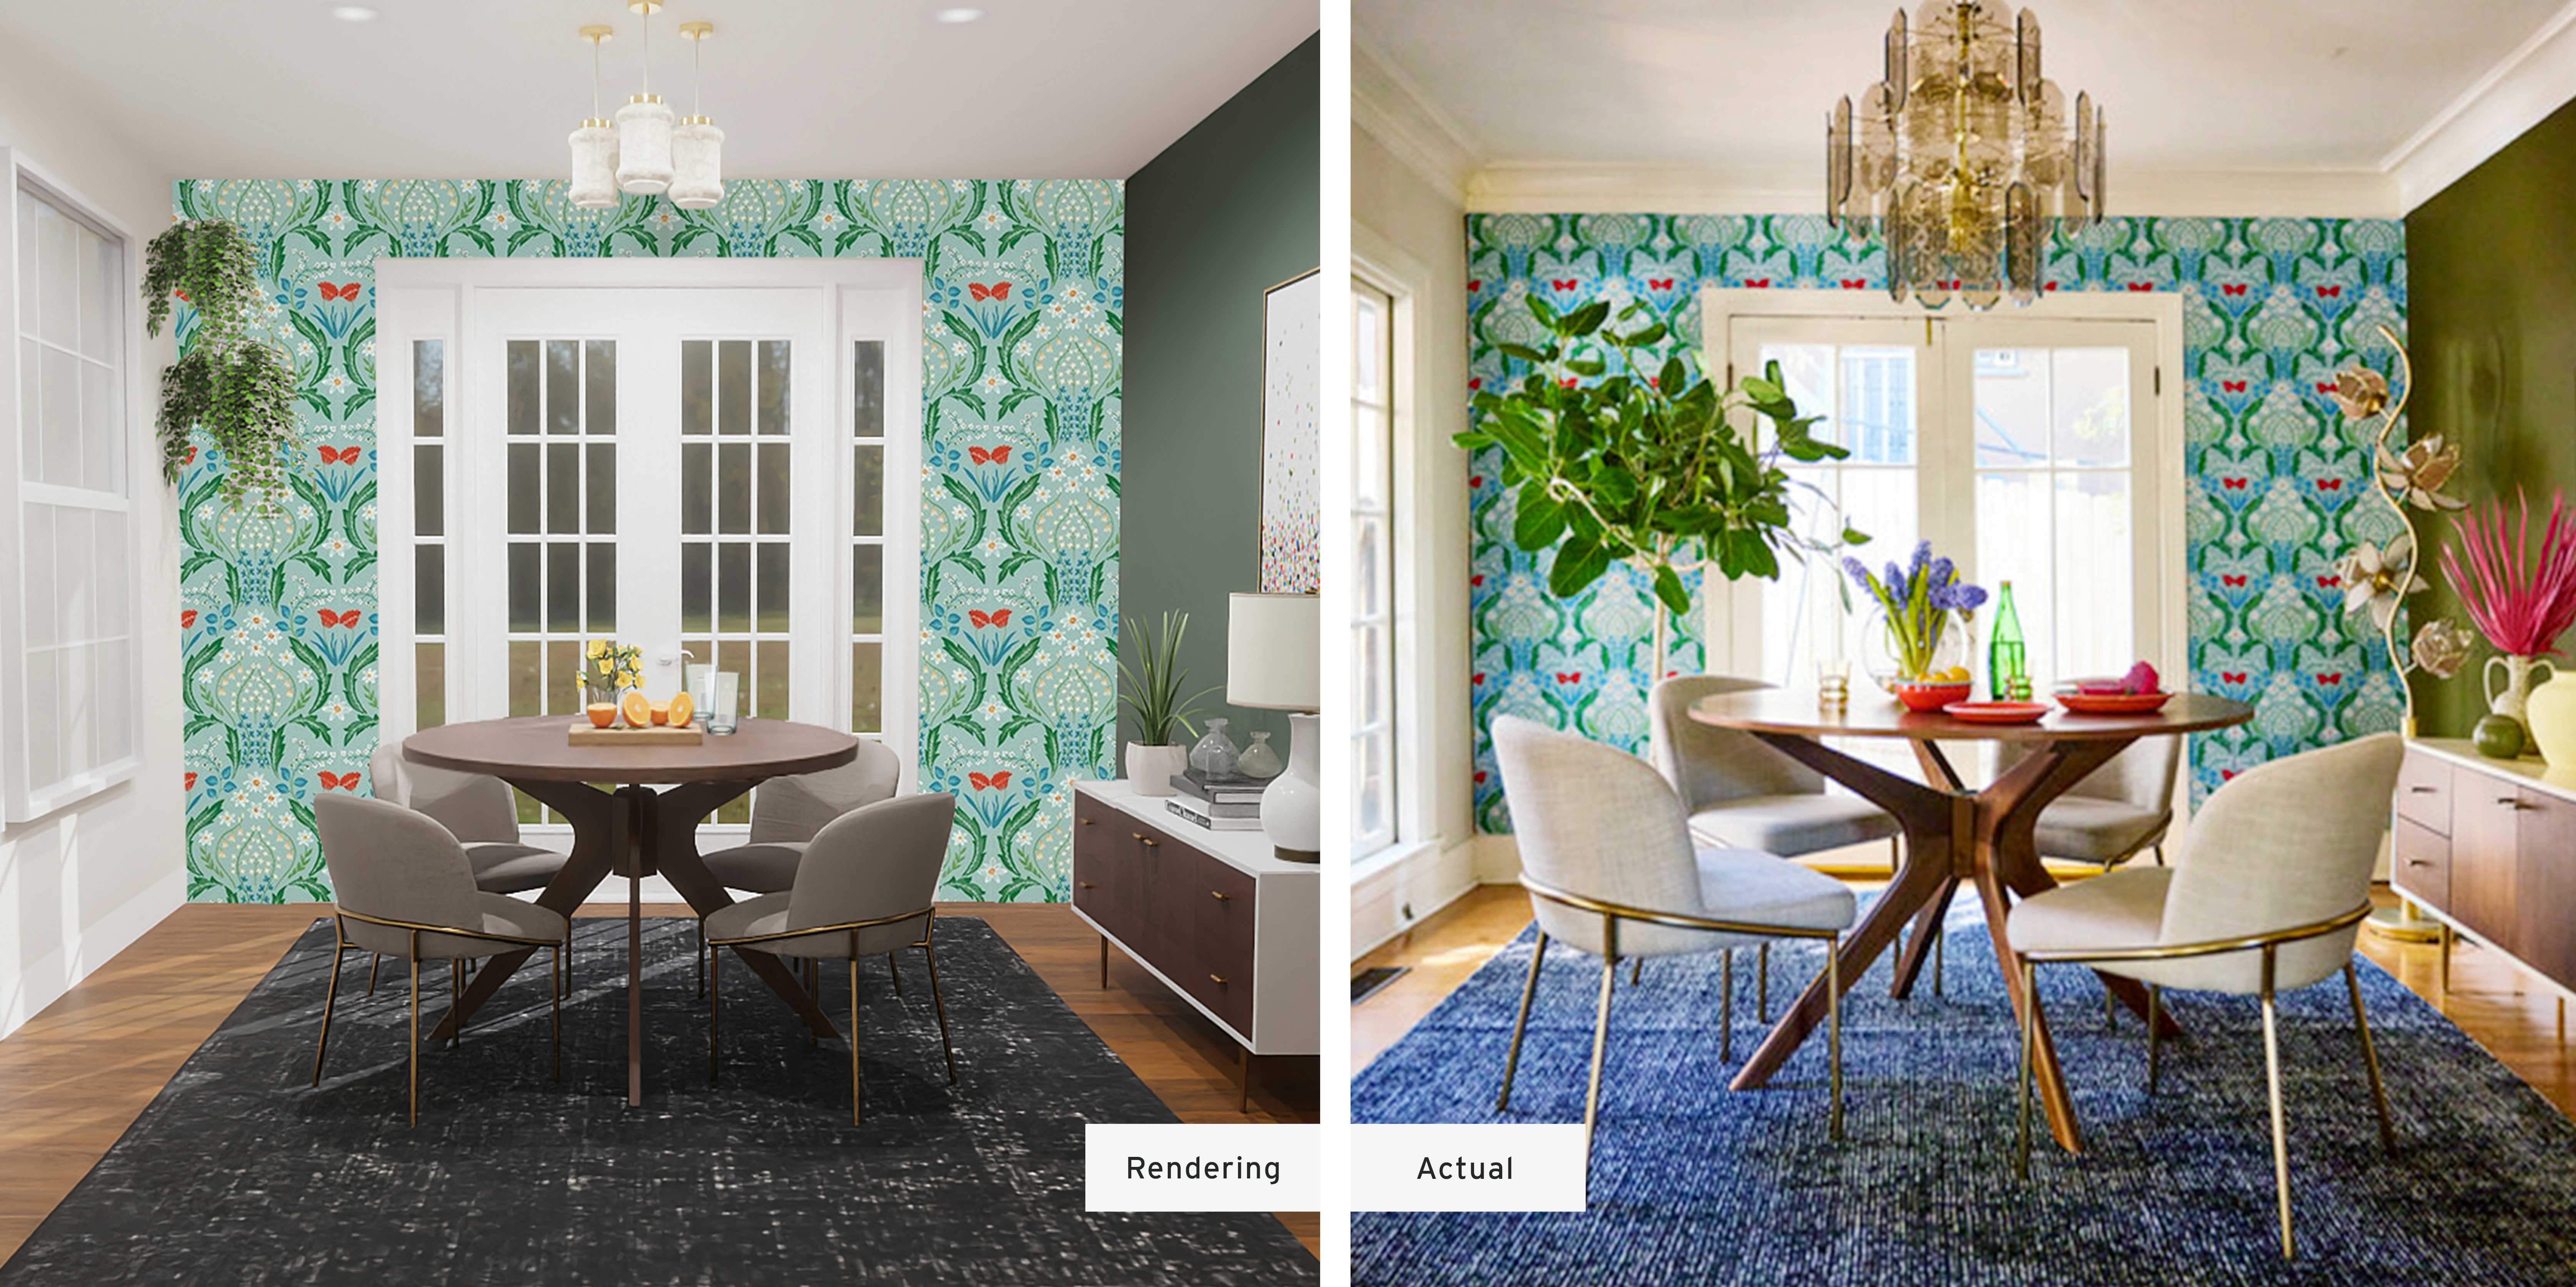 Side-by-side images of an illustrated room plan, then the finished dining room with teal wallpaper, white french doors, a blue rug, a wooden table, and white fabric chairs with gold metal legs